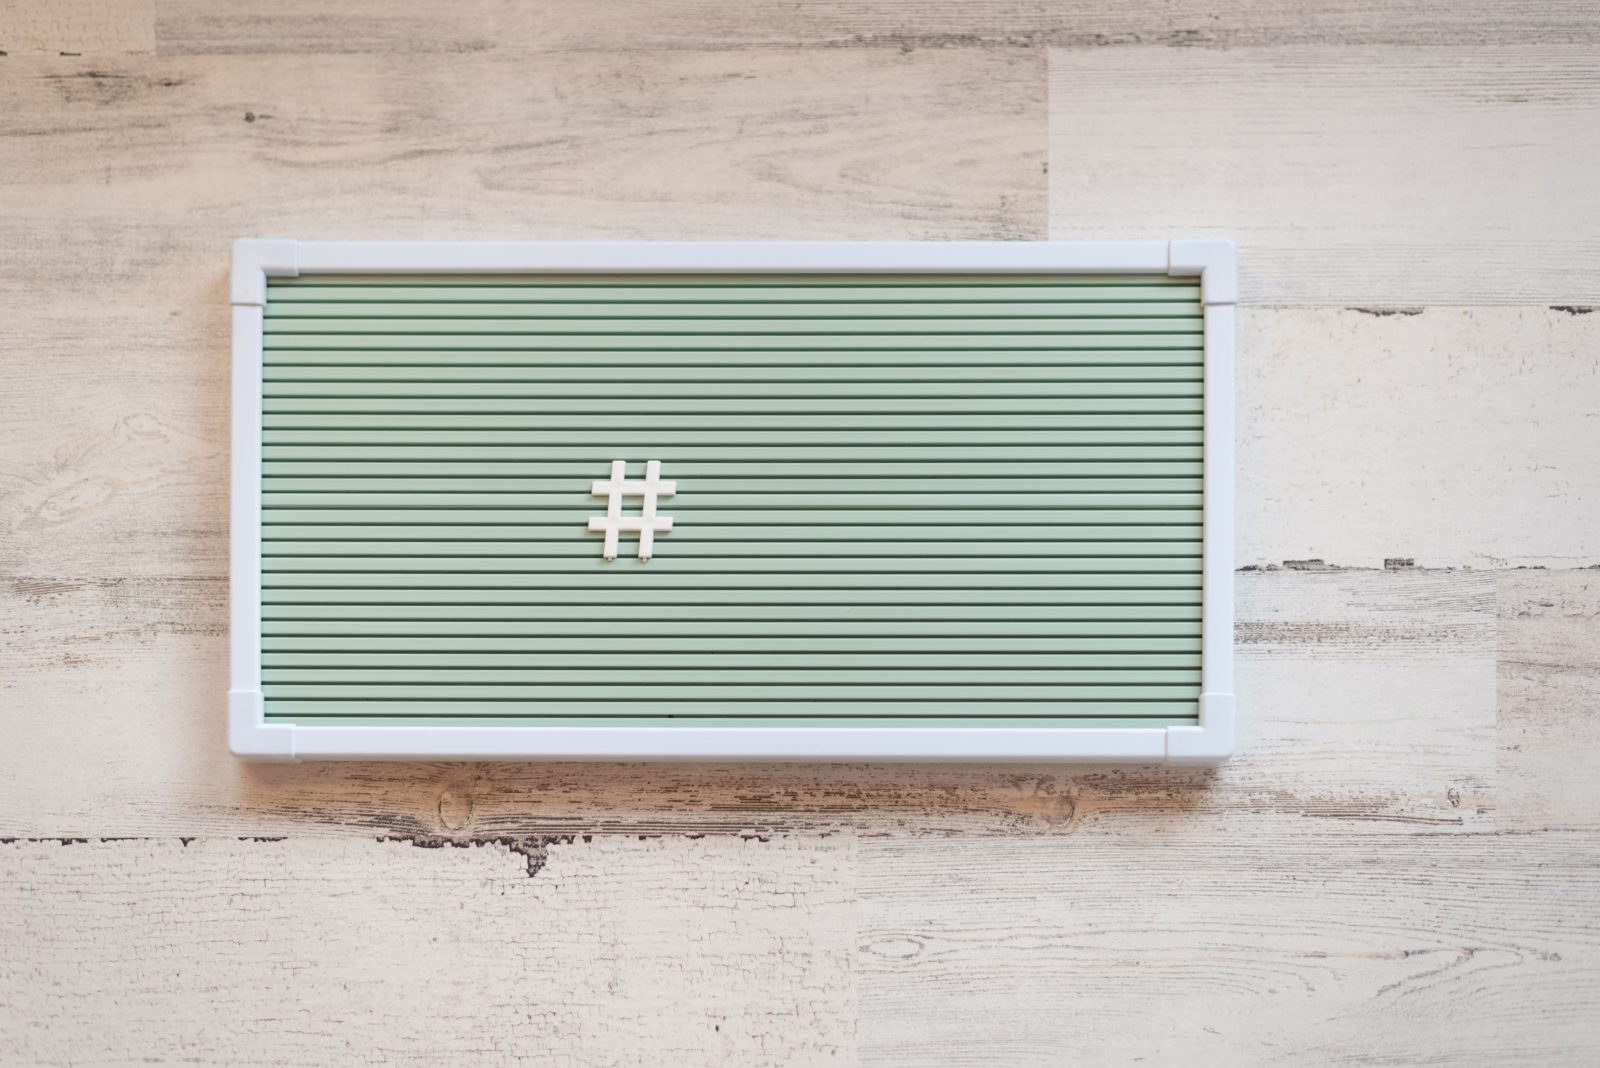 Why You Should Be Using Hashtags on Social Media